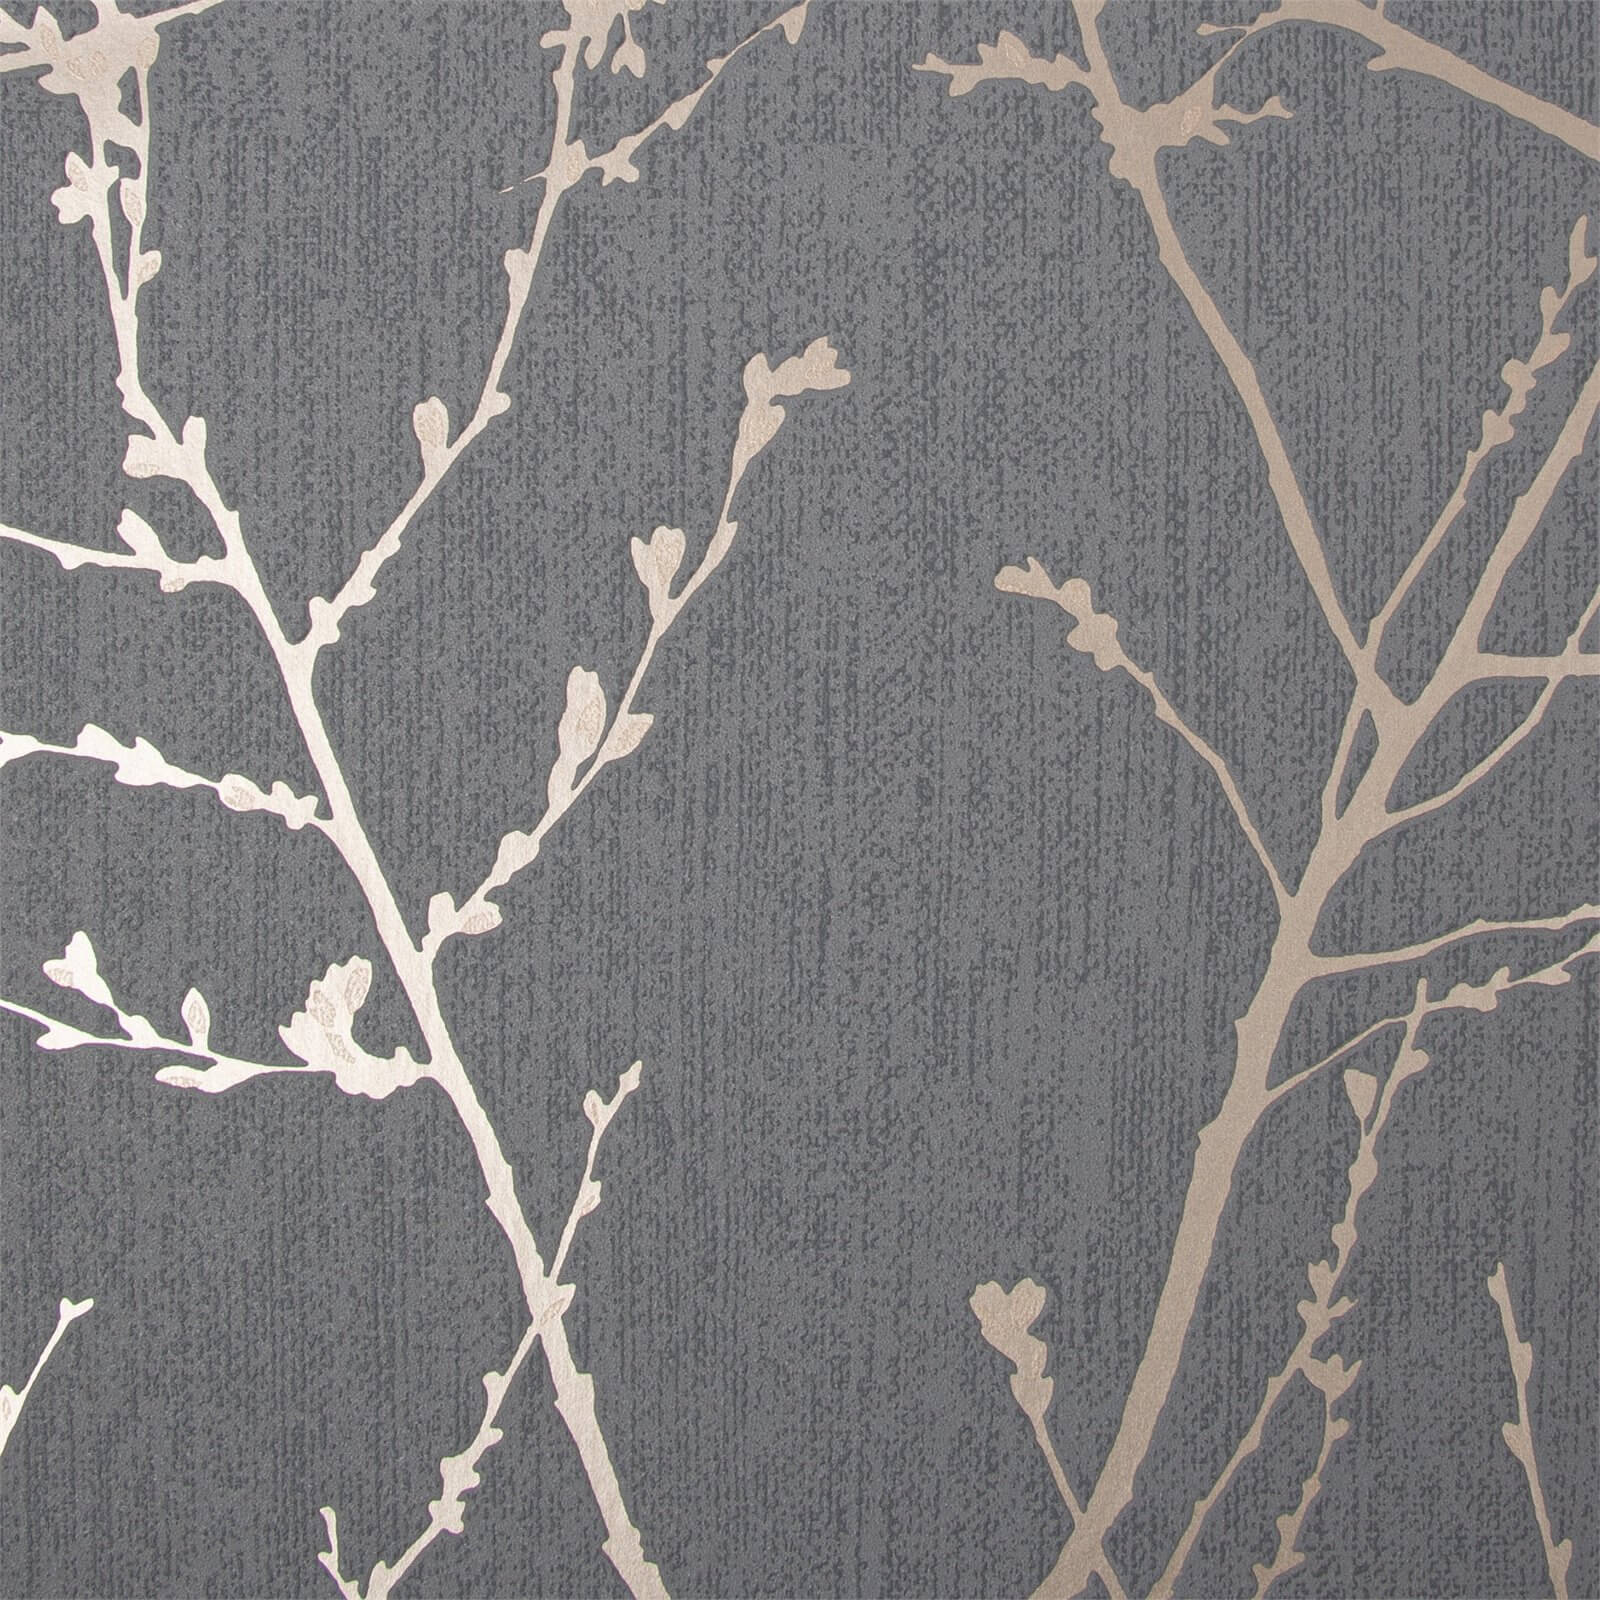 Superfresco Easy Paste the Wall Innocence Wallpaper - Charcoal And Copper